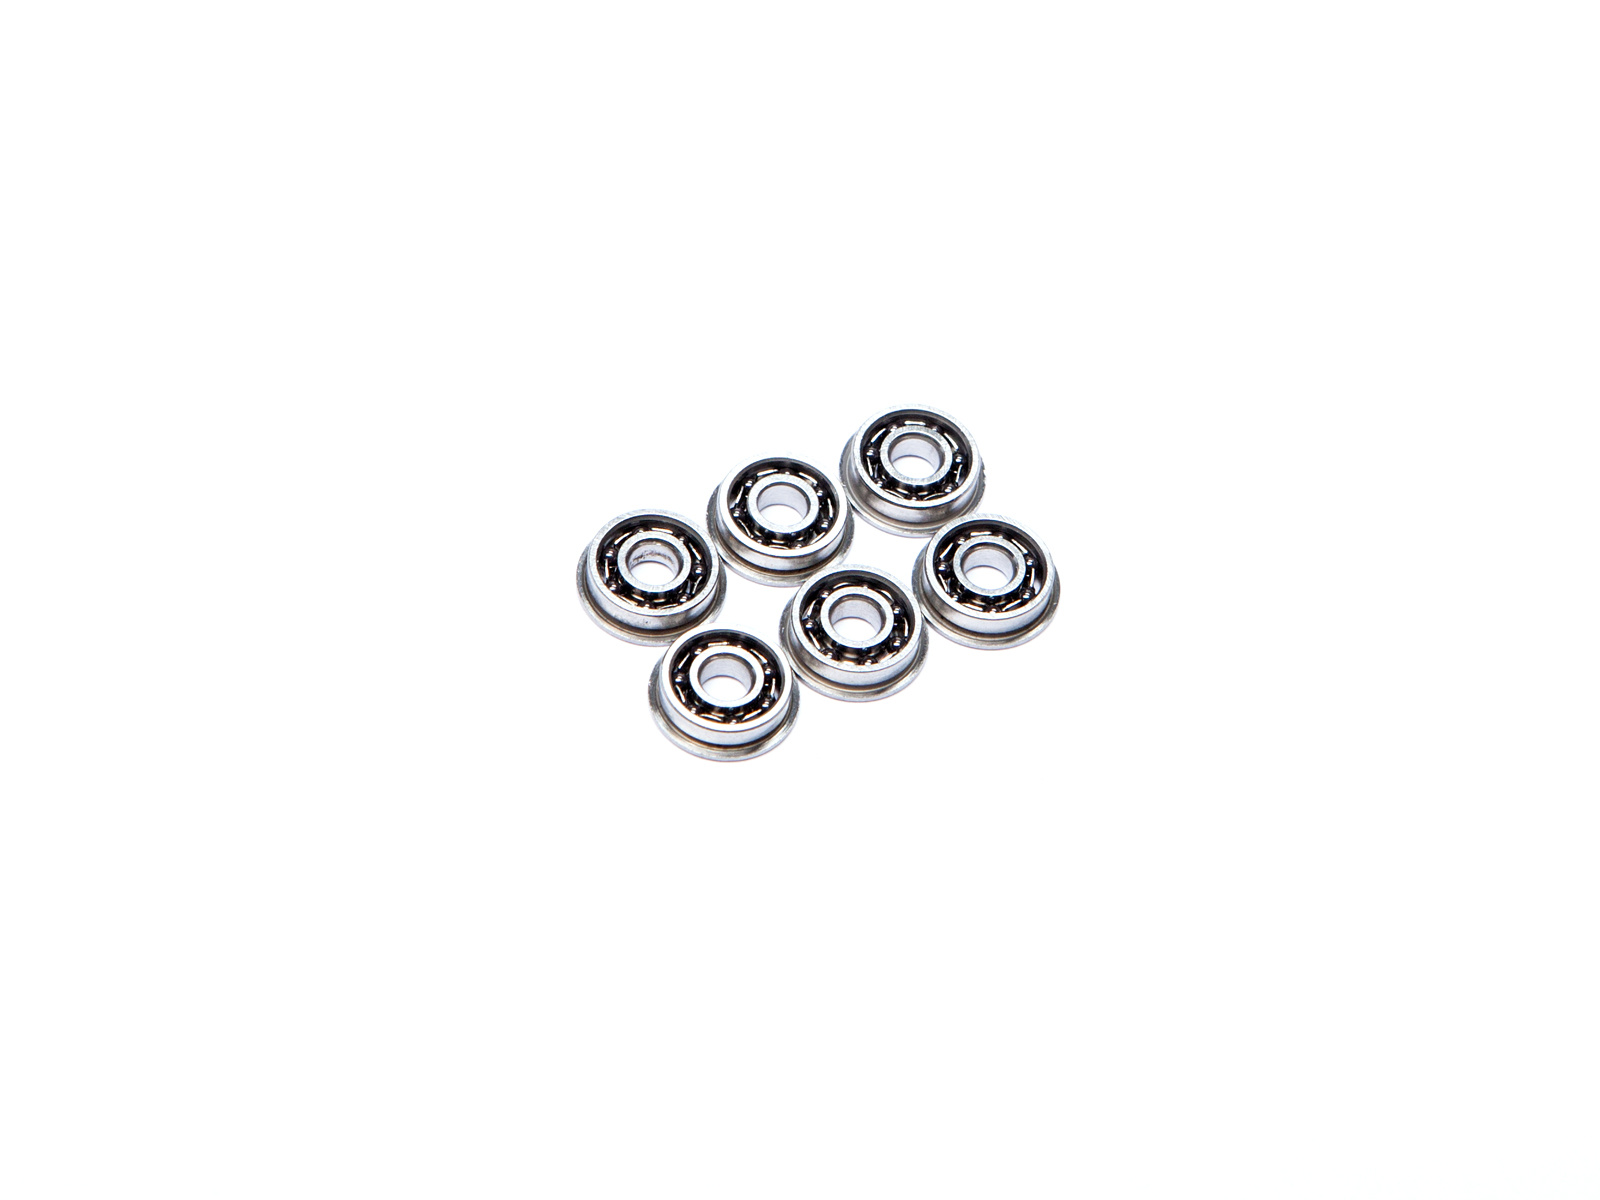 ASG Ultimate Ceramic Ball bearings 8 mm - 6 pieces